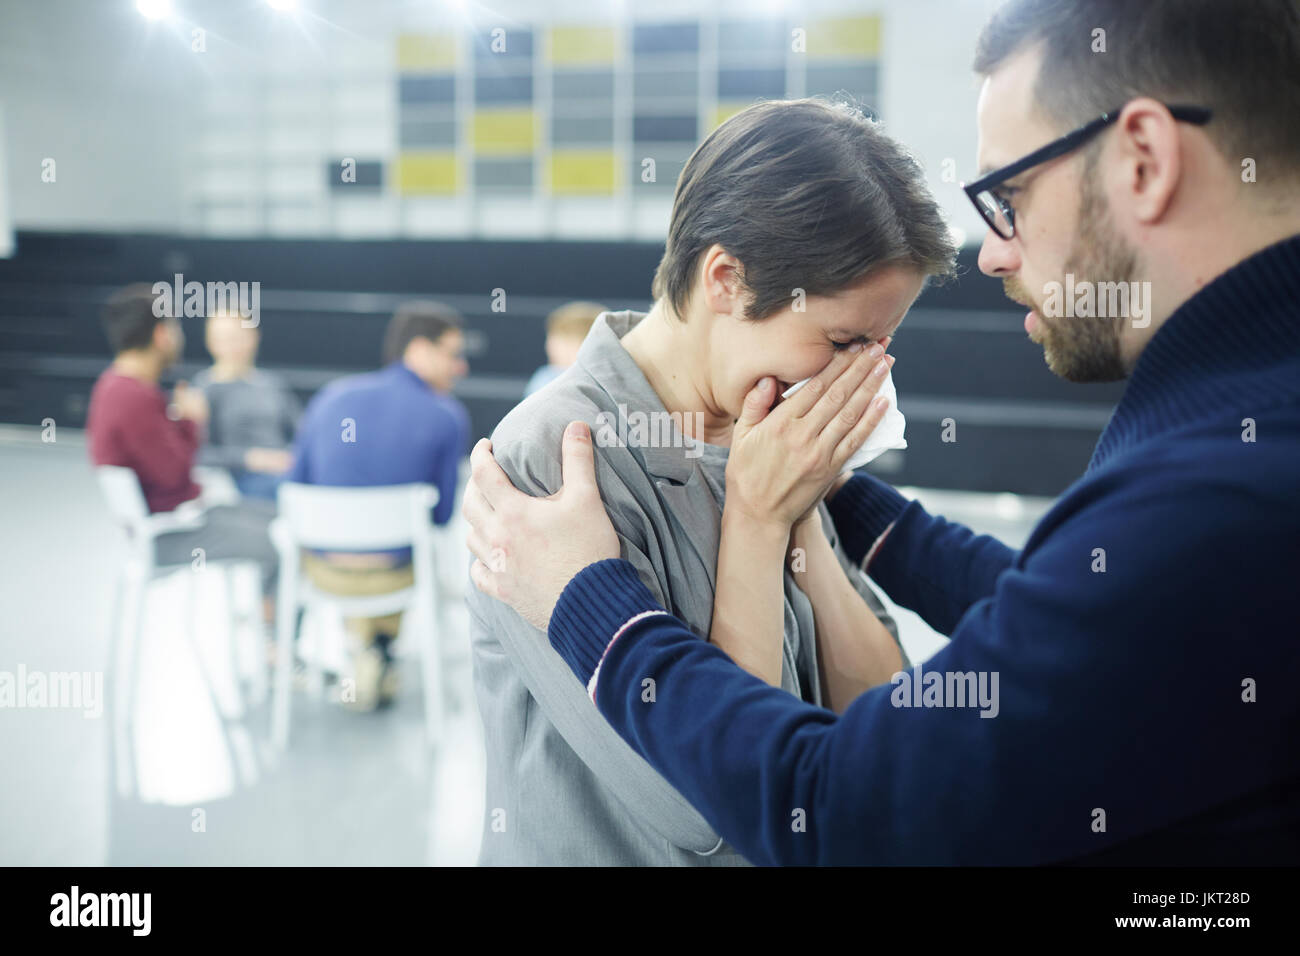 Man embracing crying groupmate and supporting her Stock Photo